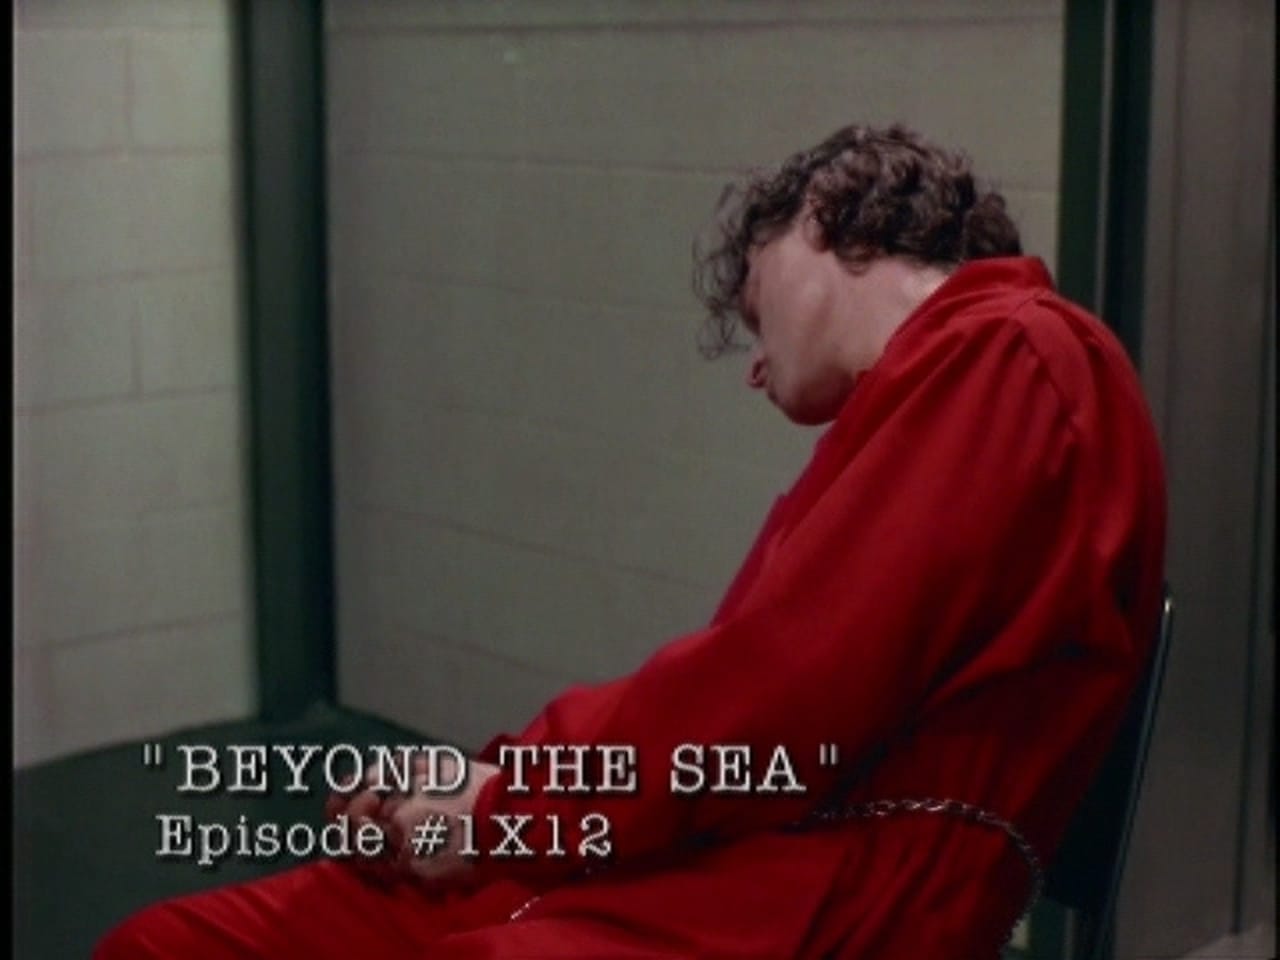 The X-Files - Season 0 Episode 26 : Behind the truth - Beyond the sea